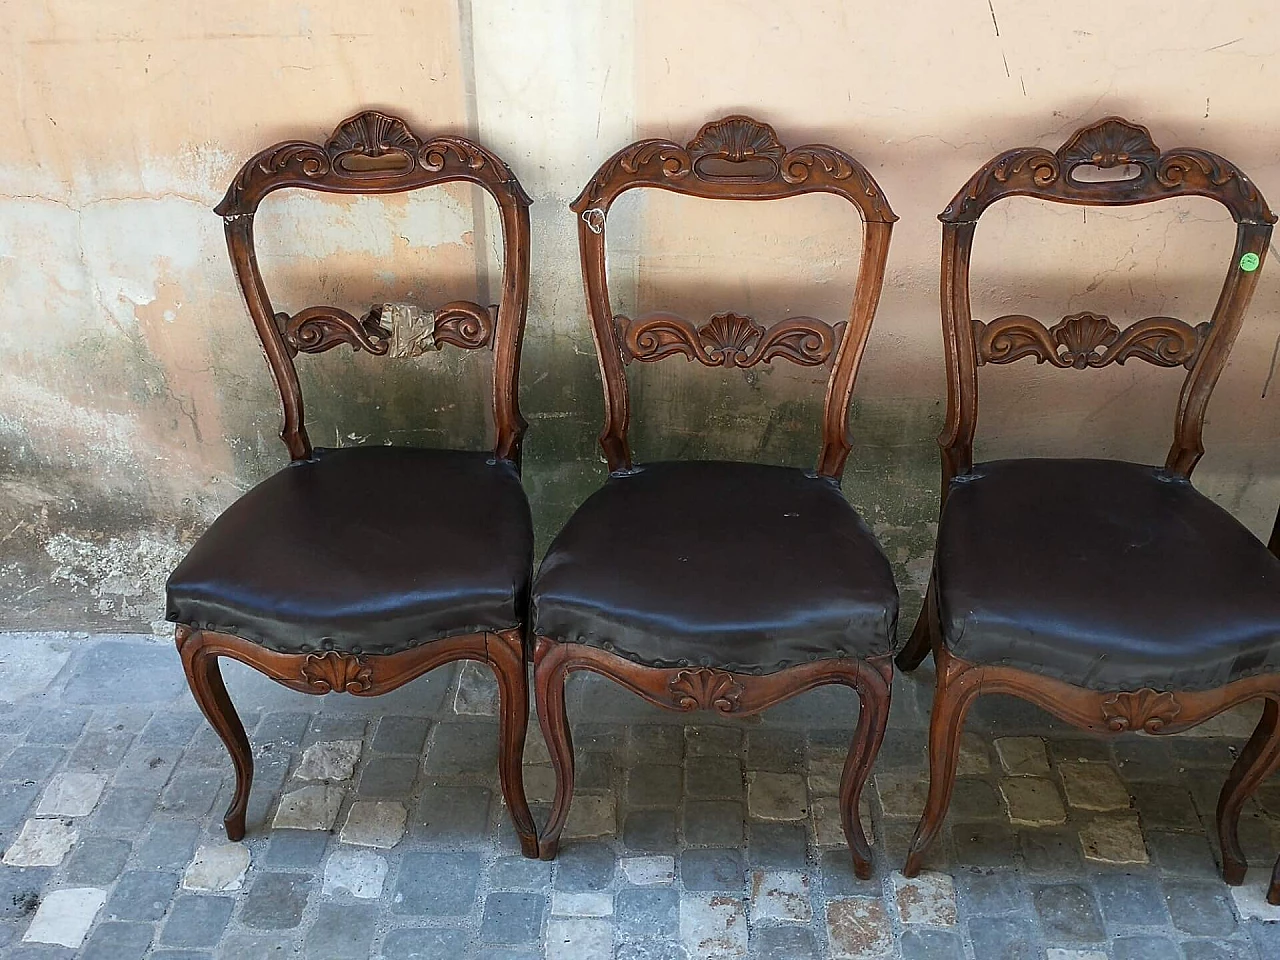 6 Louis XVI walnut chairs with leather covers, Veneto, late 18th century 1310494